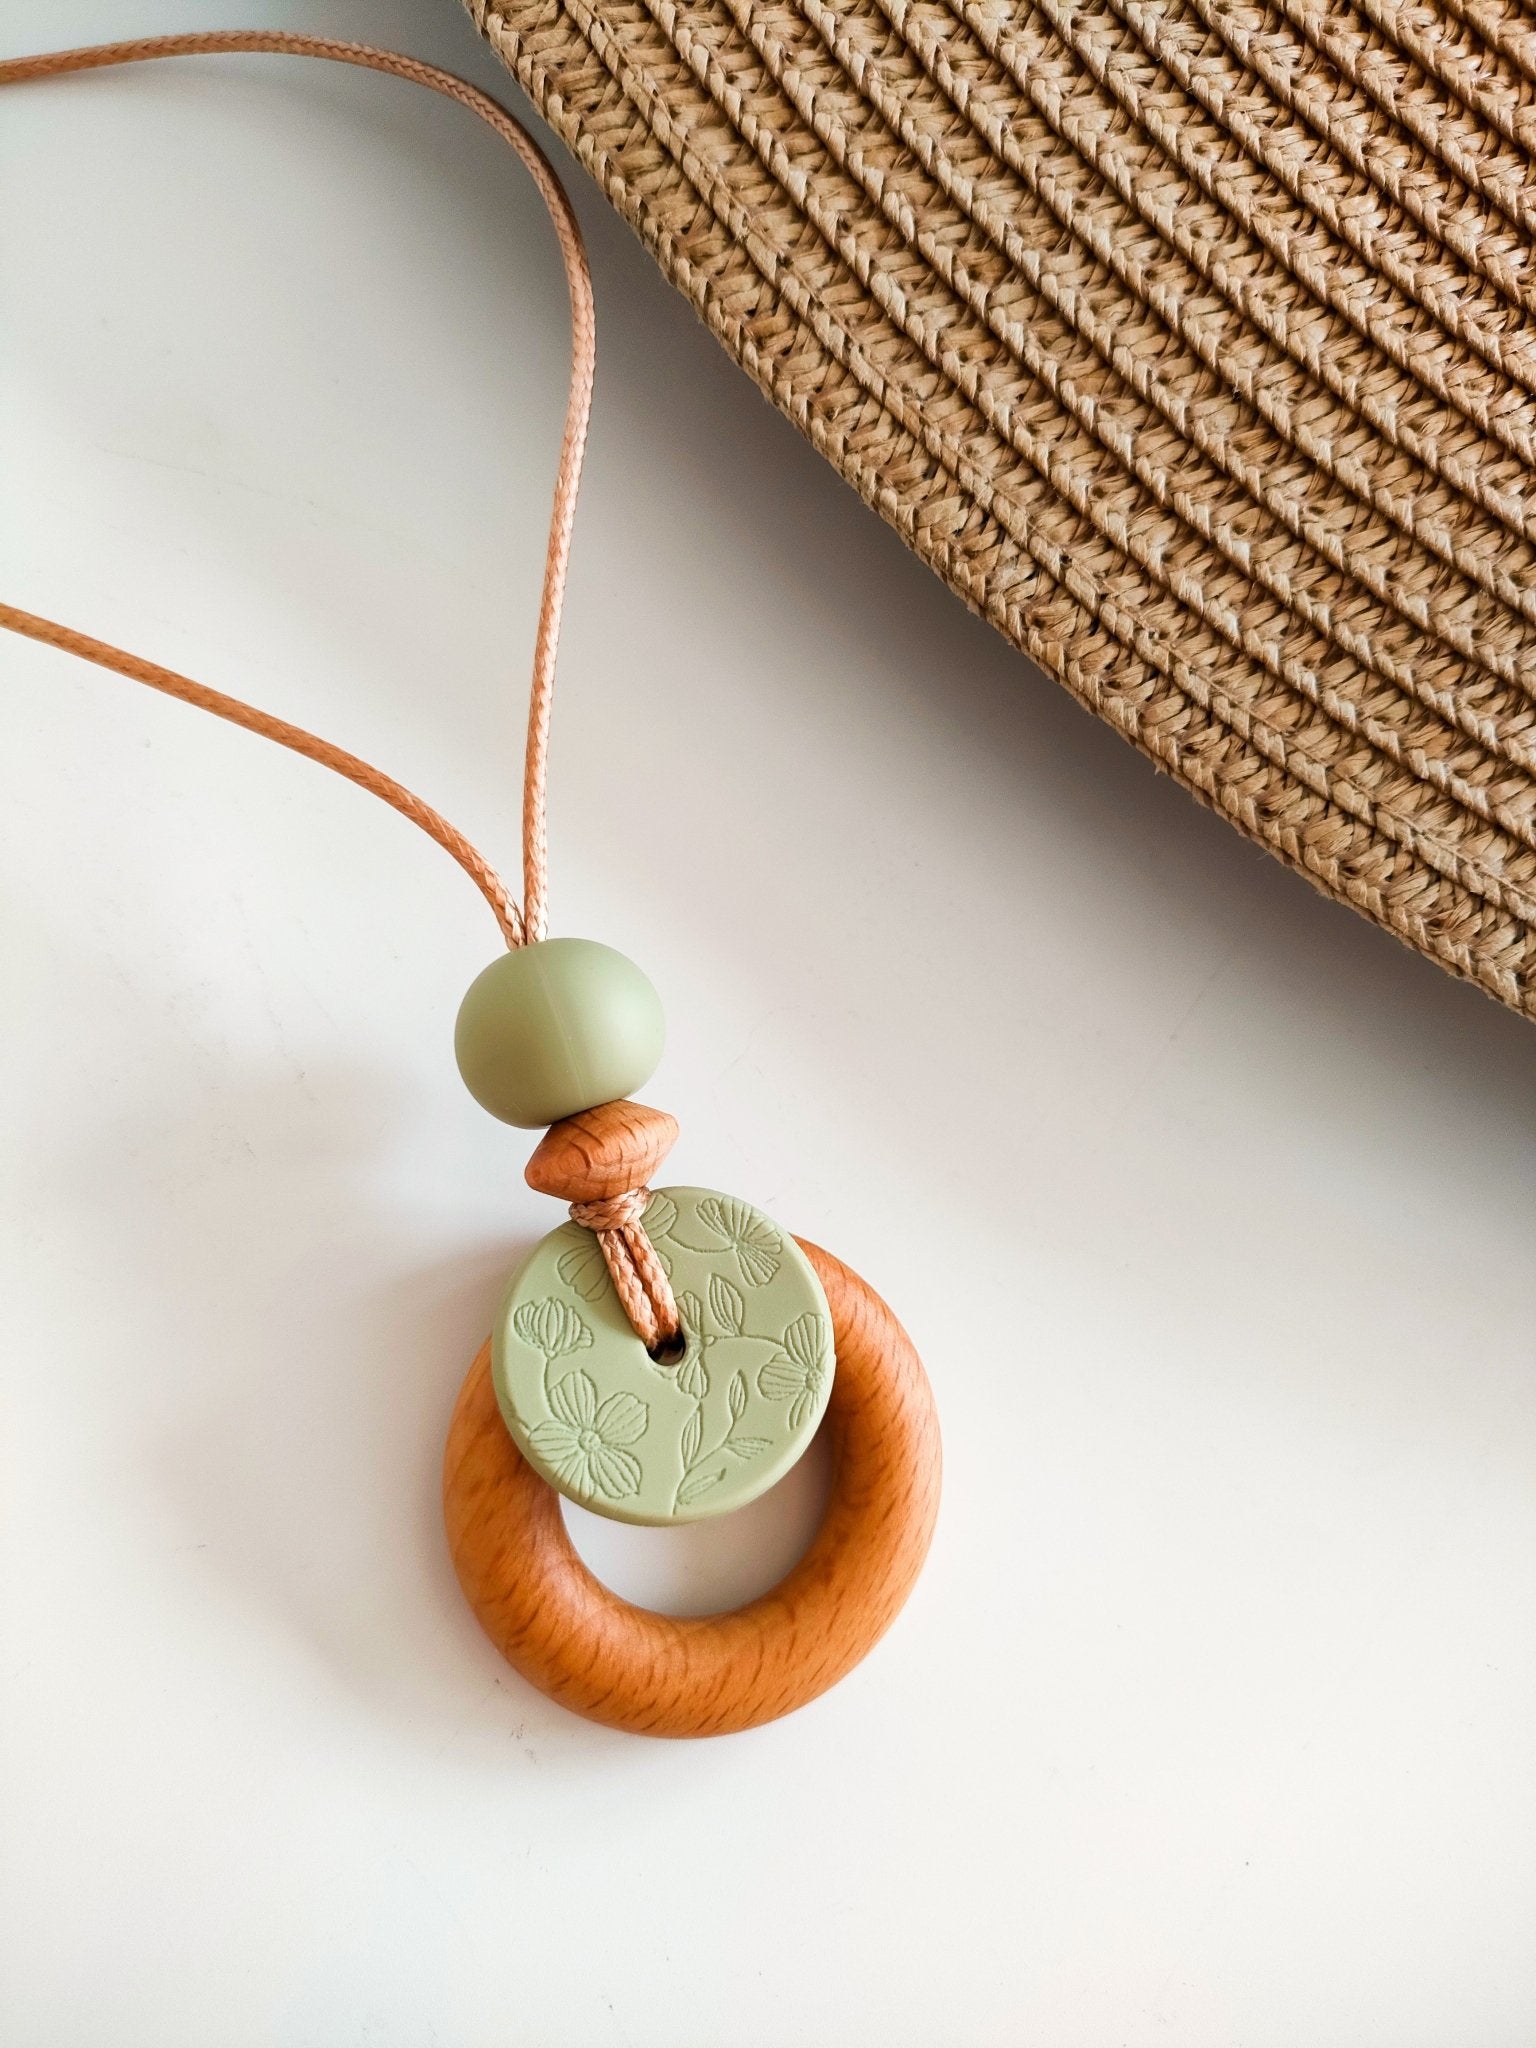 Embossed Lint Bloom Pendant - Bennie Blooms Breastfeeding, Teething and Fiddle Jewellery at its finest.